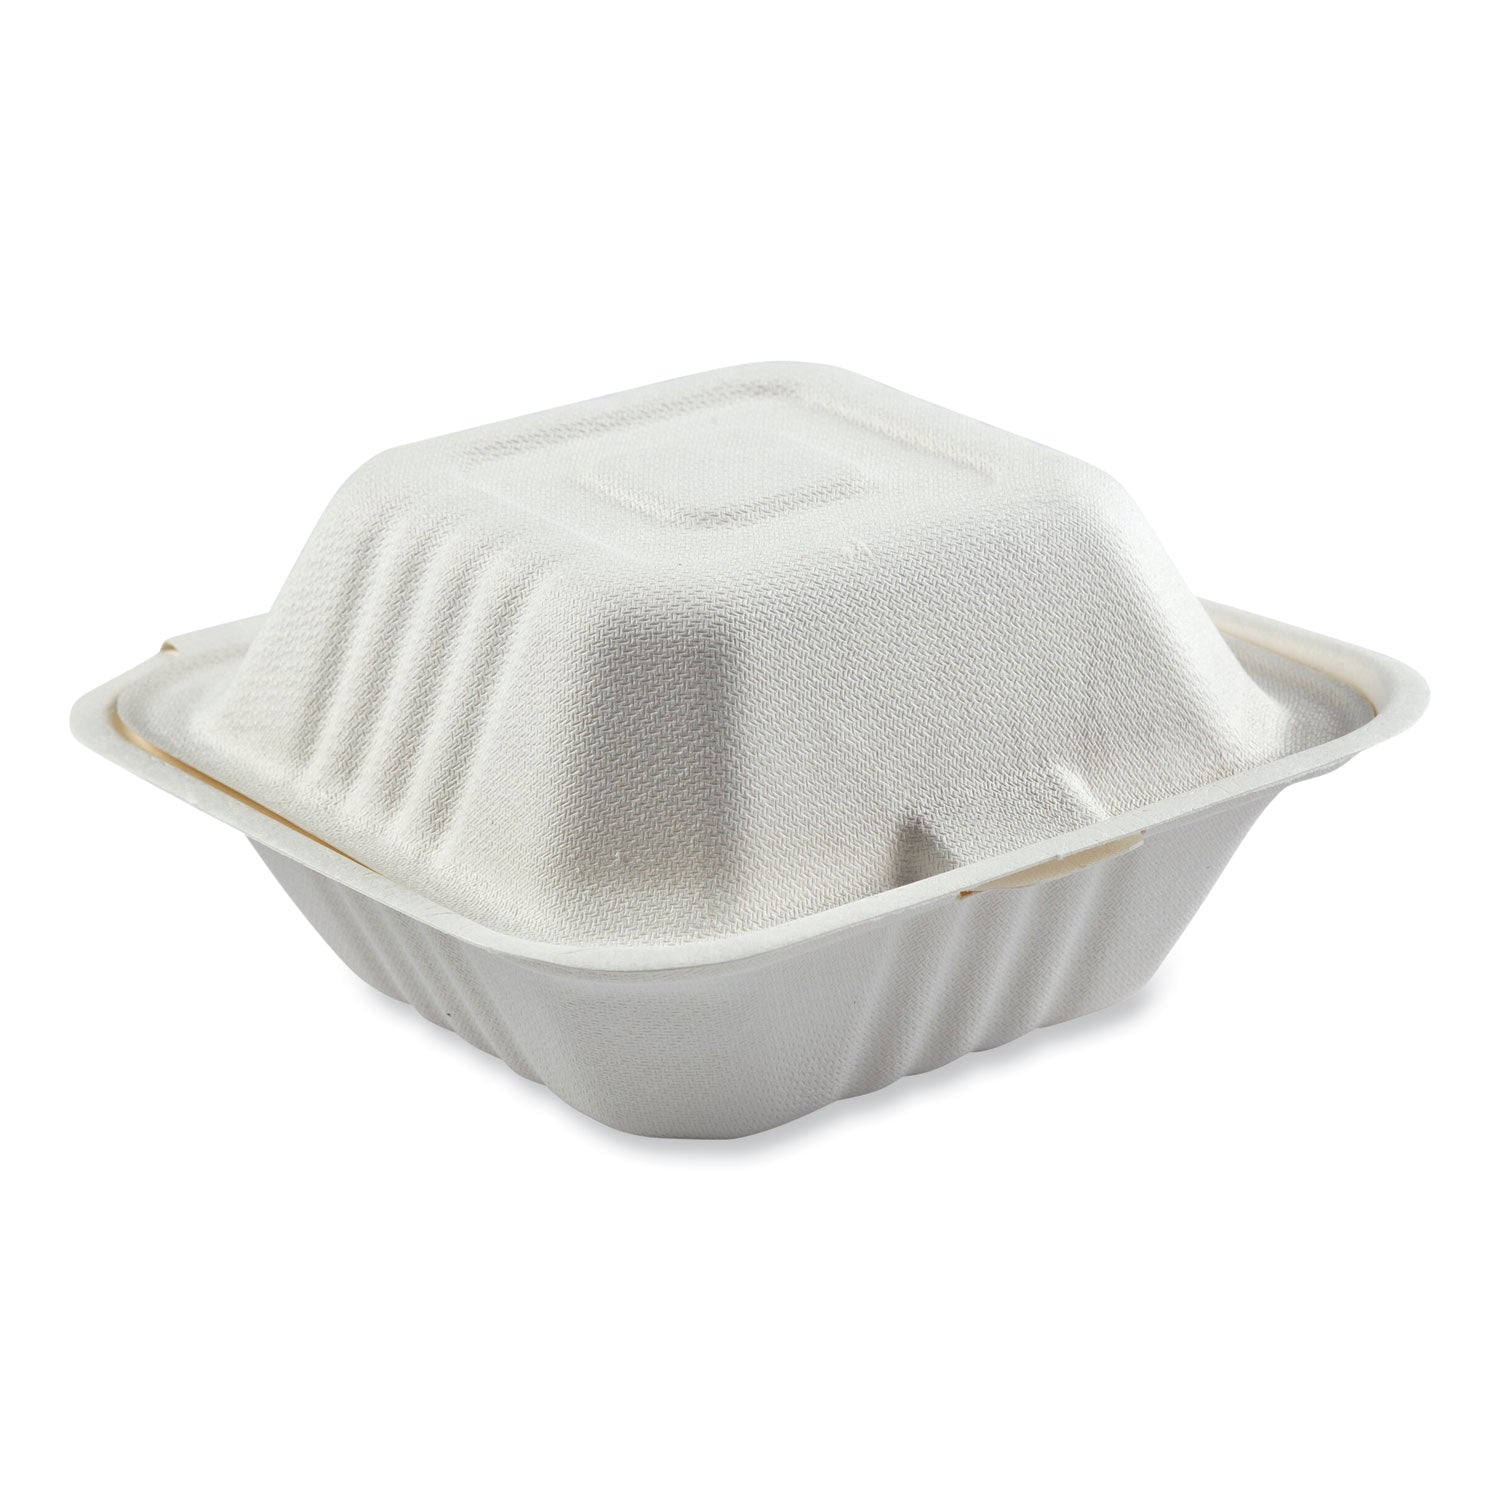 bagasse-pfas-free-food-containers-1-compartment-6-x-6-x-319-white-bamboo-sugarcane-500-carton_rpphl66npfa - 1